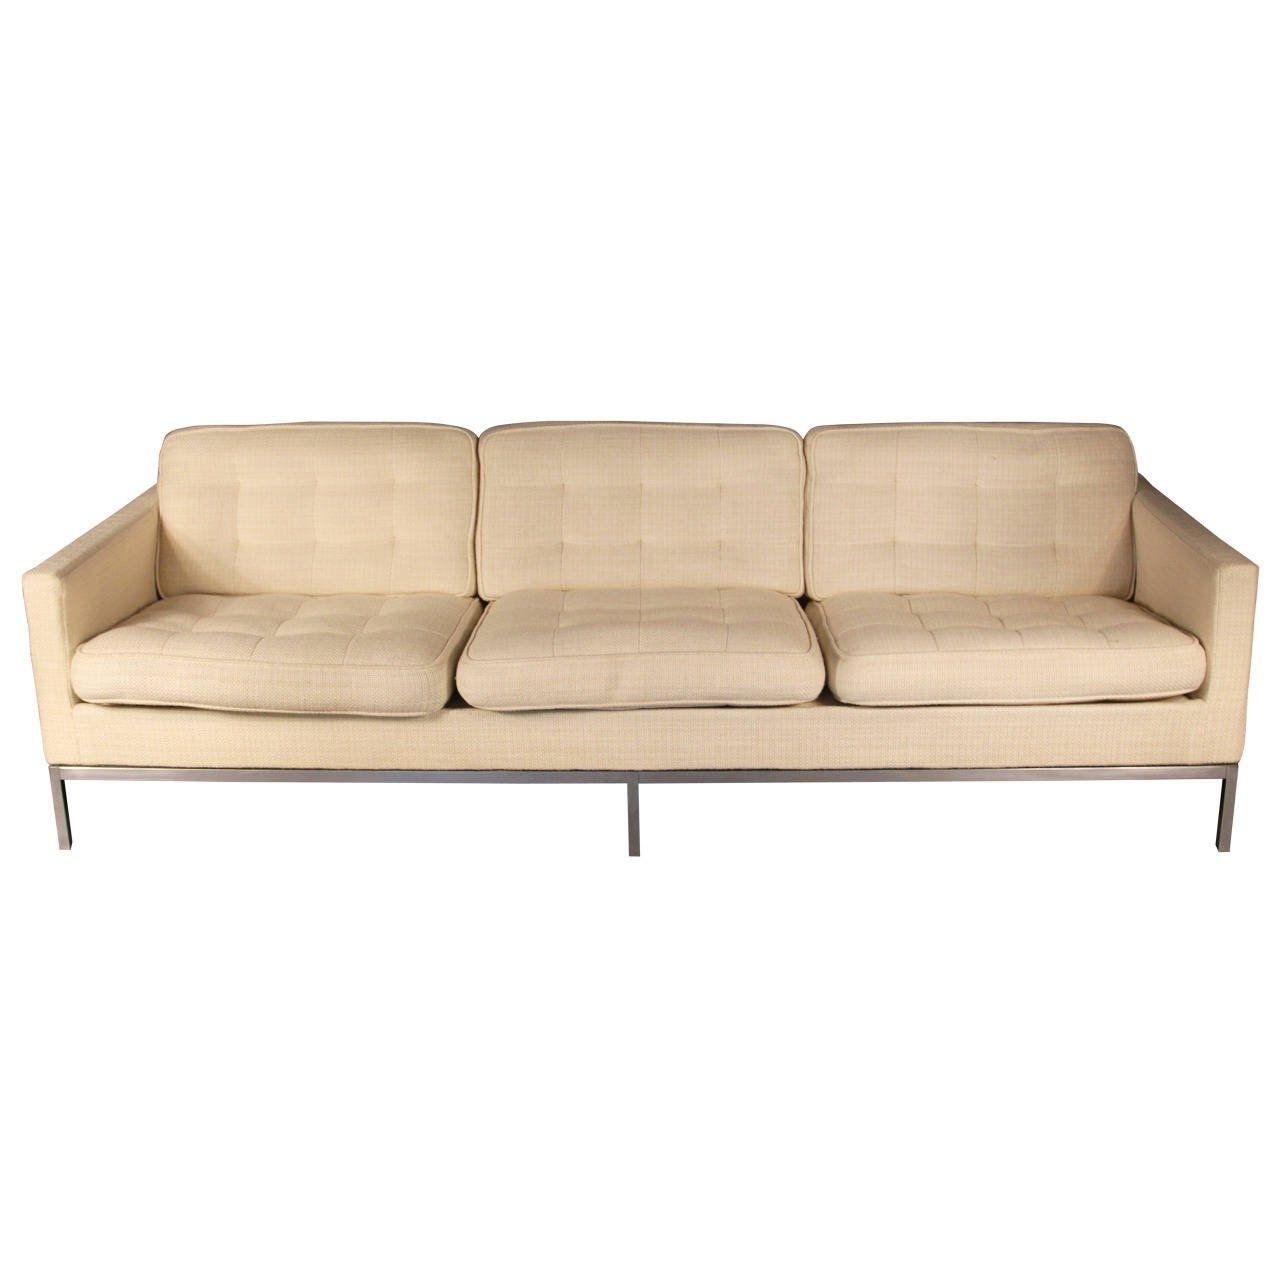 Florence Grand Sofas Throughout Most Current Florence Knoll Sofas – 61 For Sale At 1stdibs (View 6 of 20)